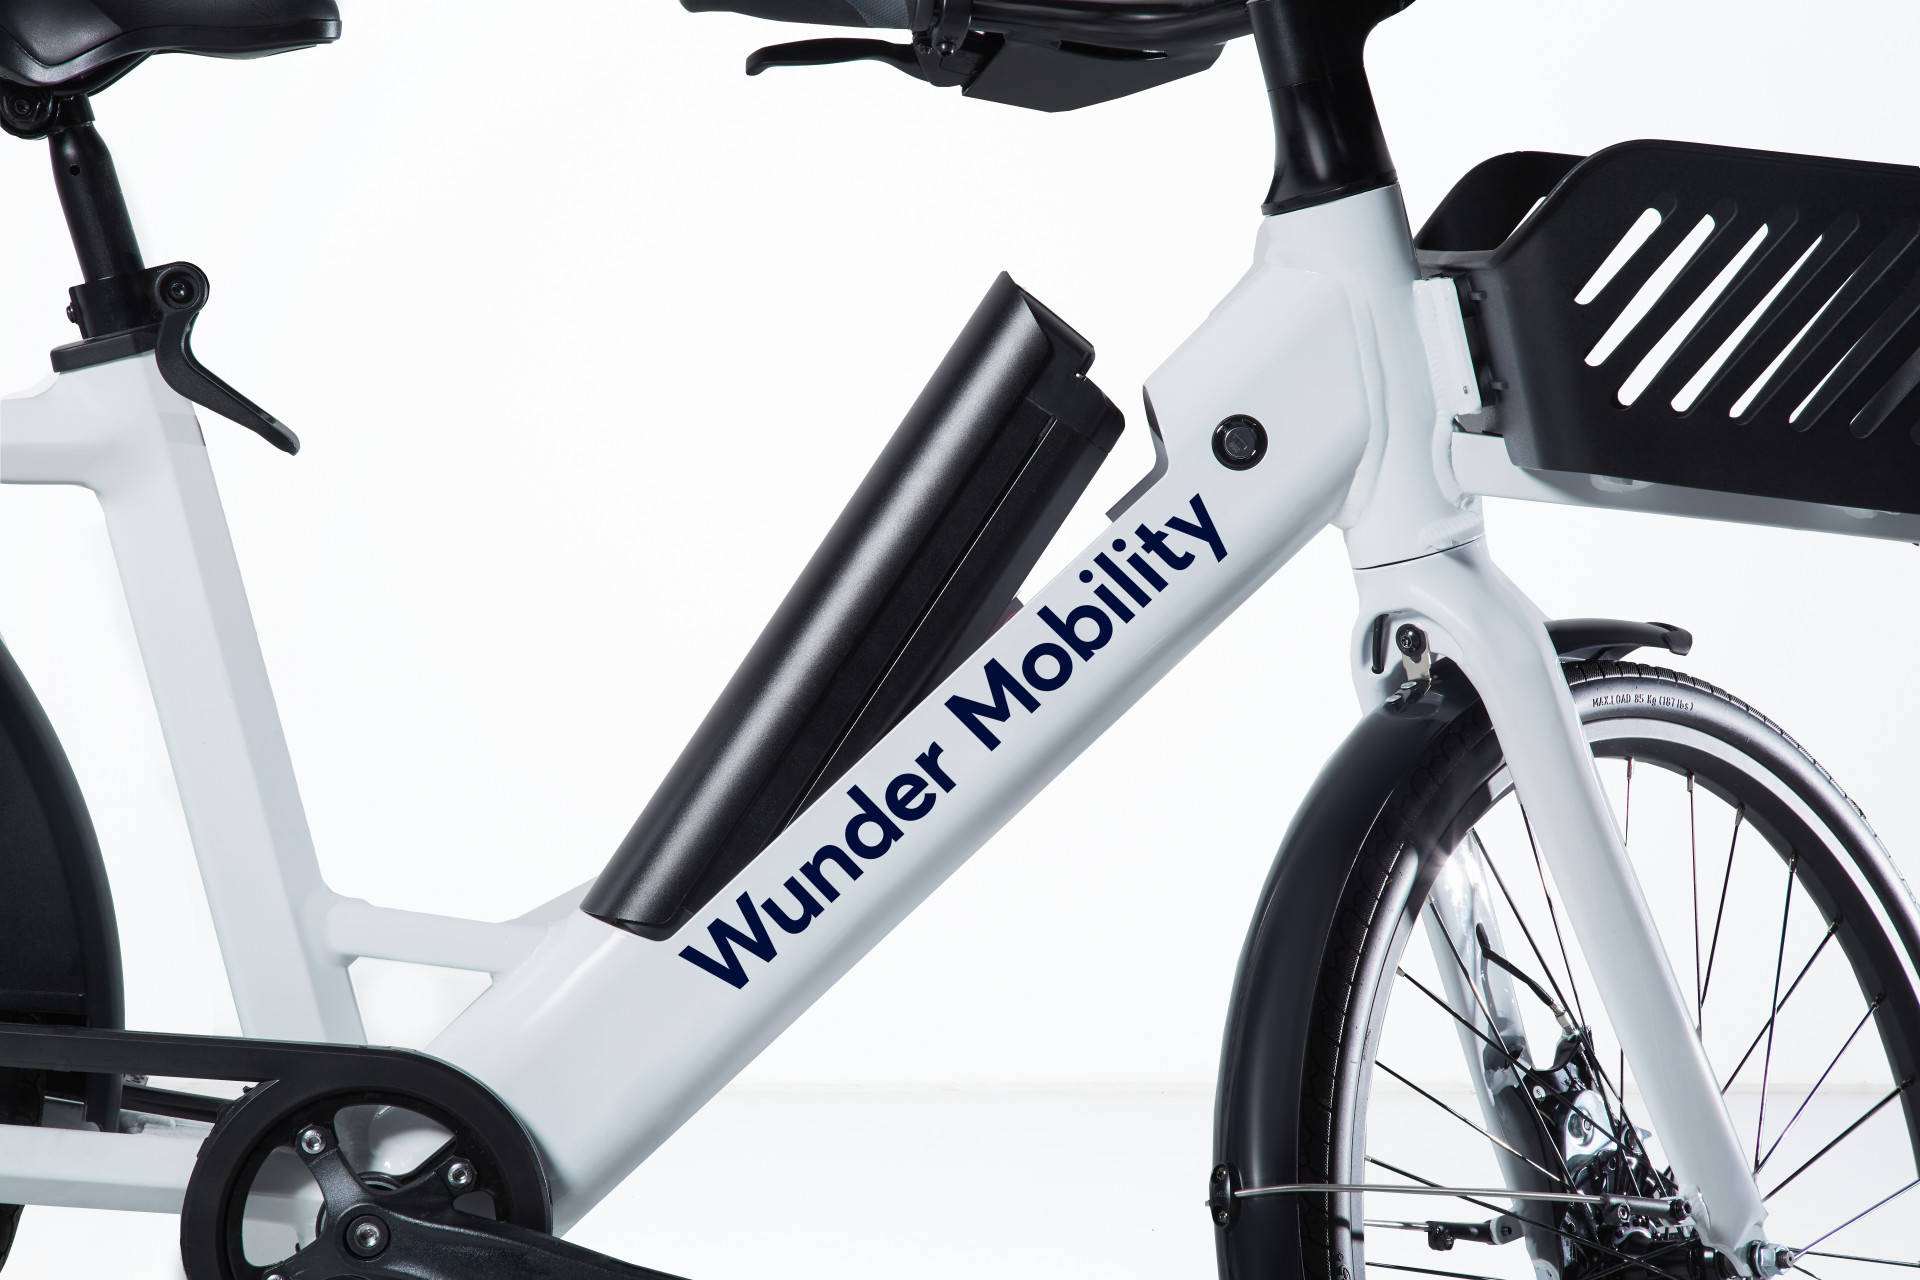 Side view image of the Wunder e-bike and the uplifted battery, and basket in front.